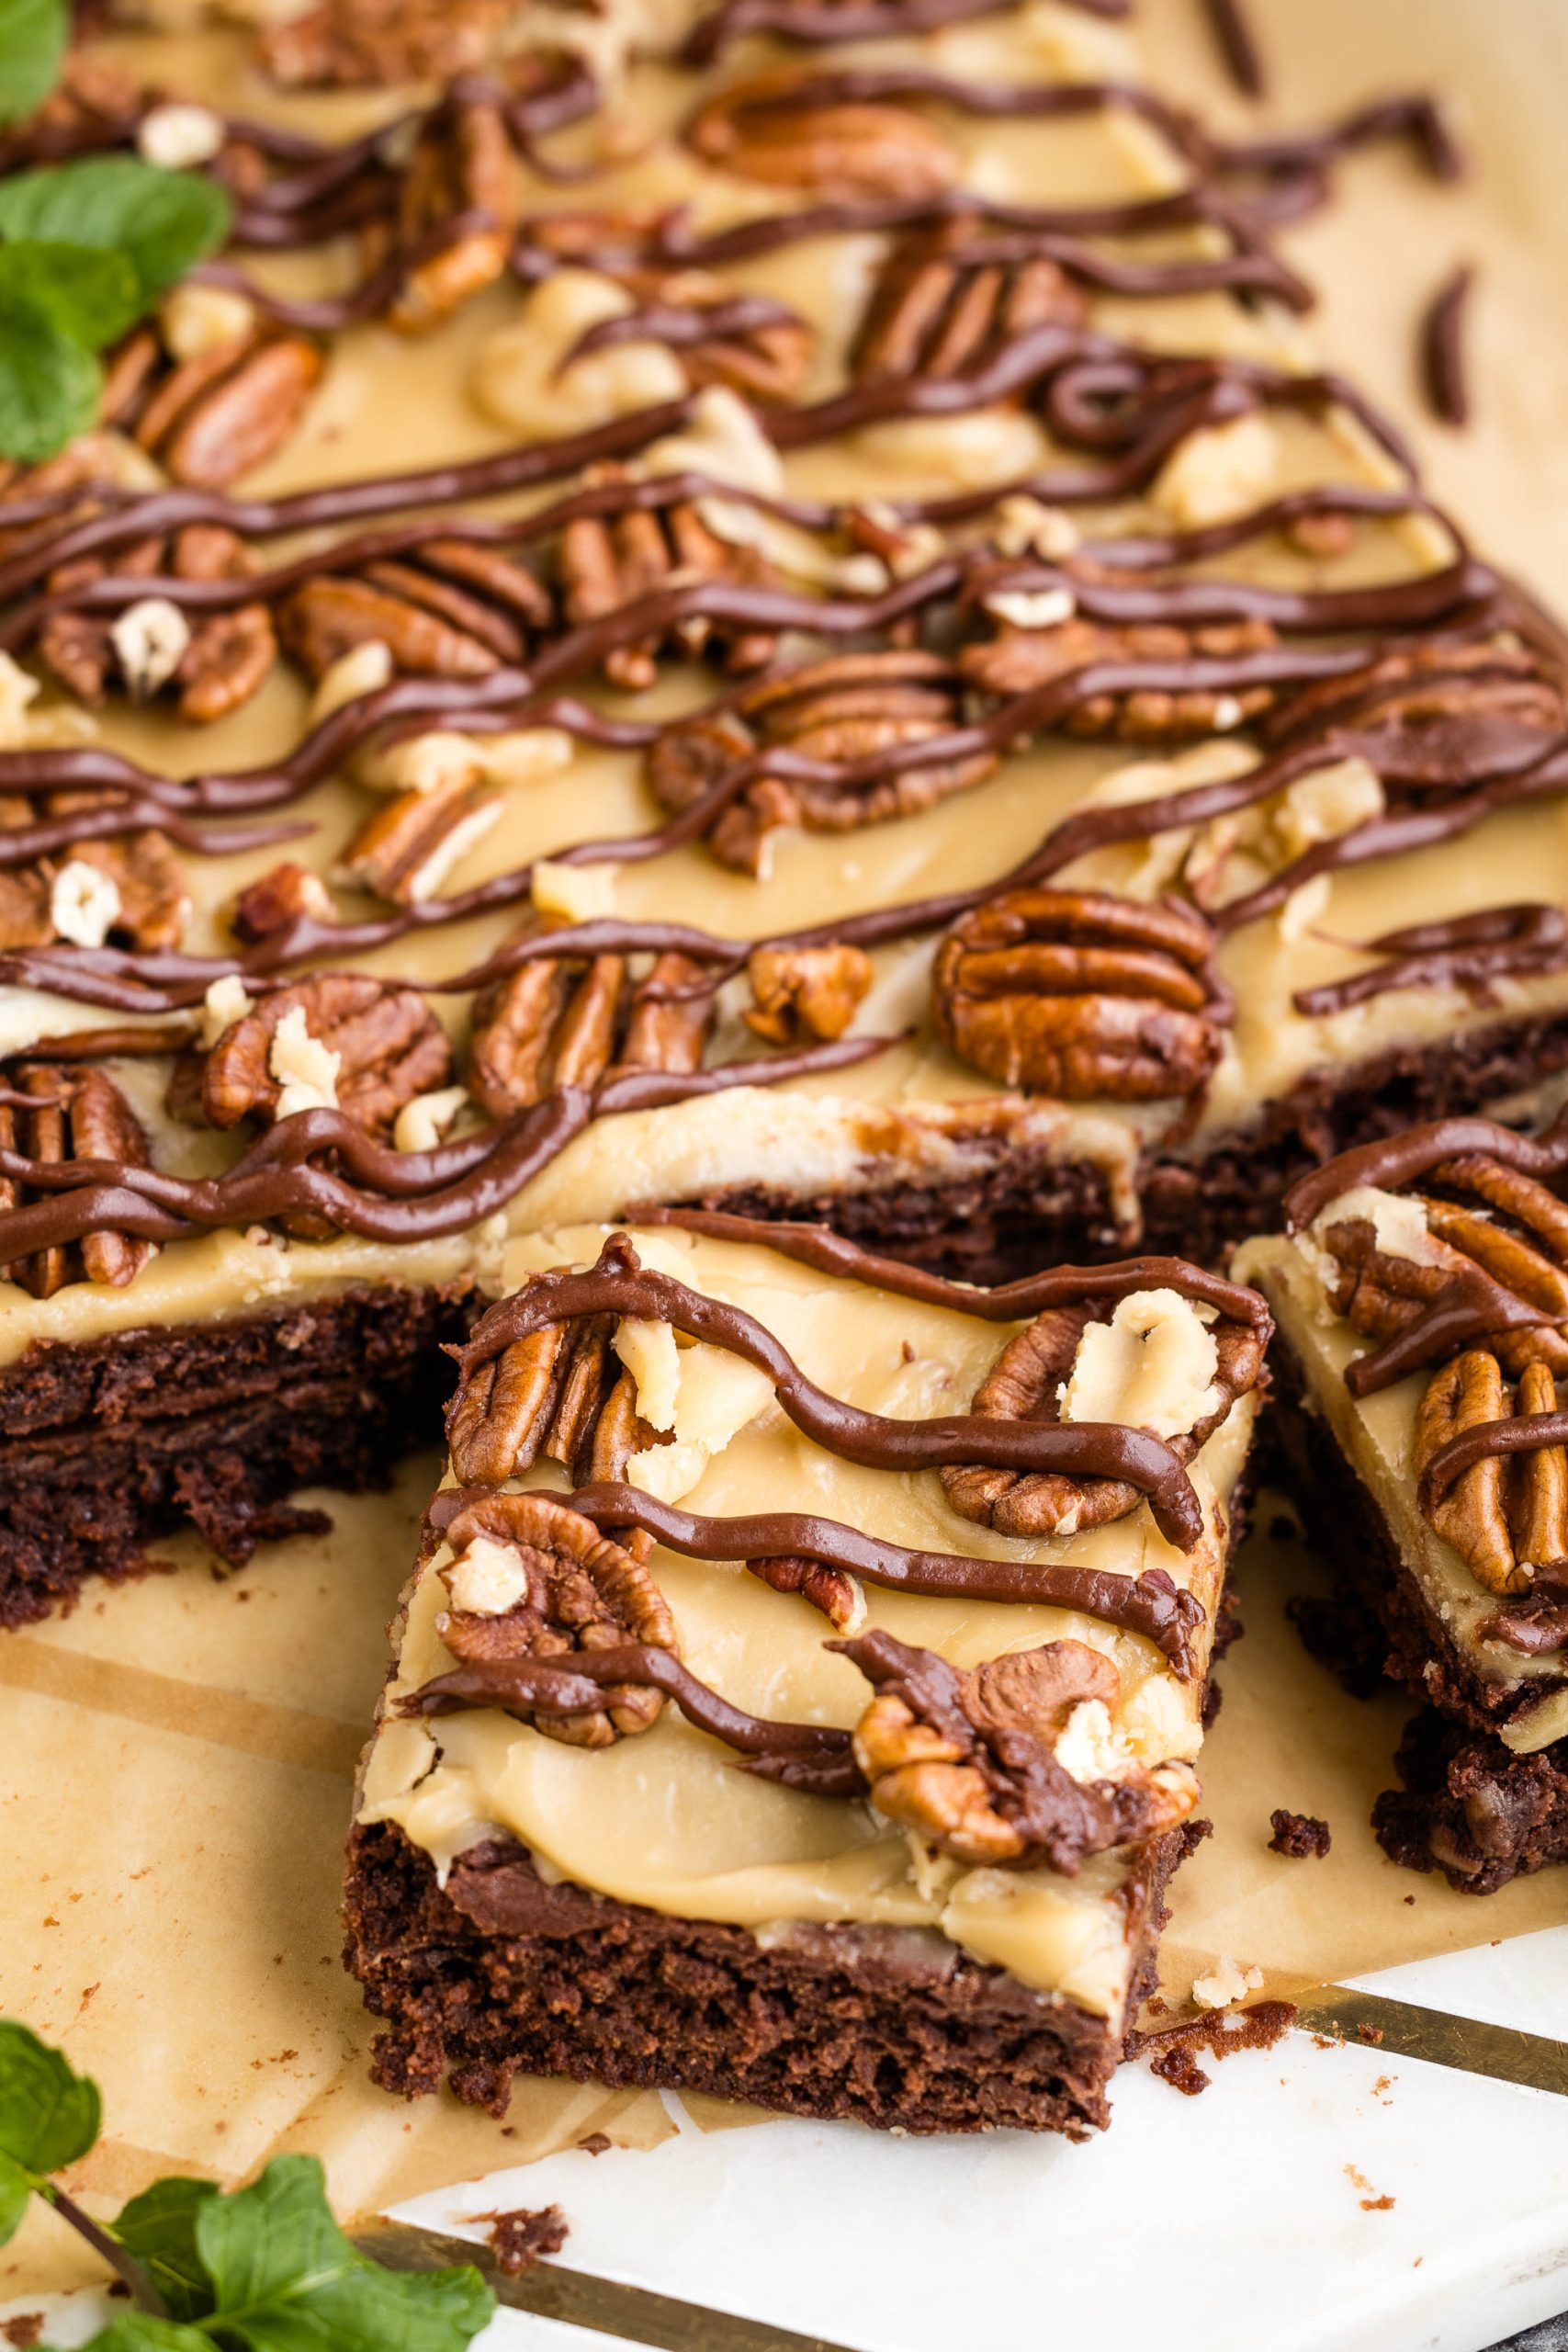 A piece of chocolate brownie with pecans and a drizzle of peanut butter.